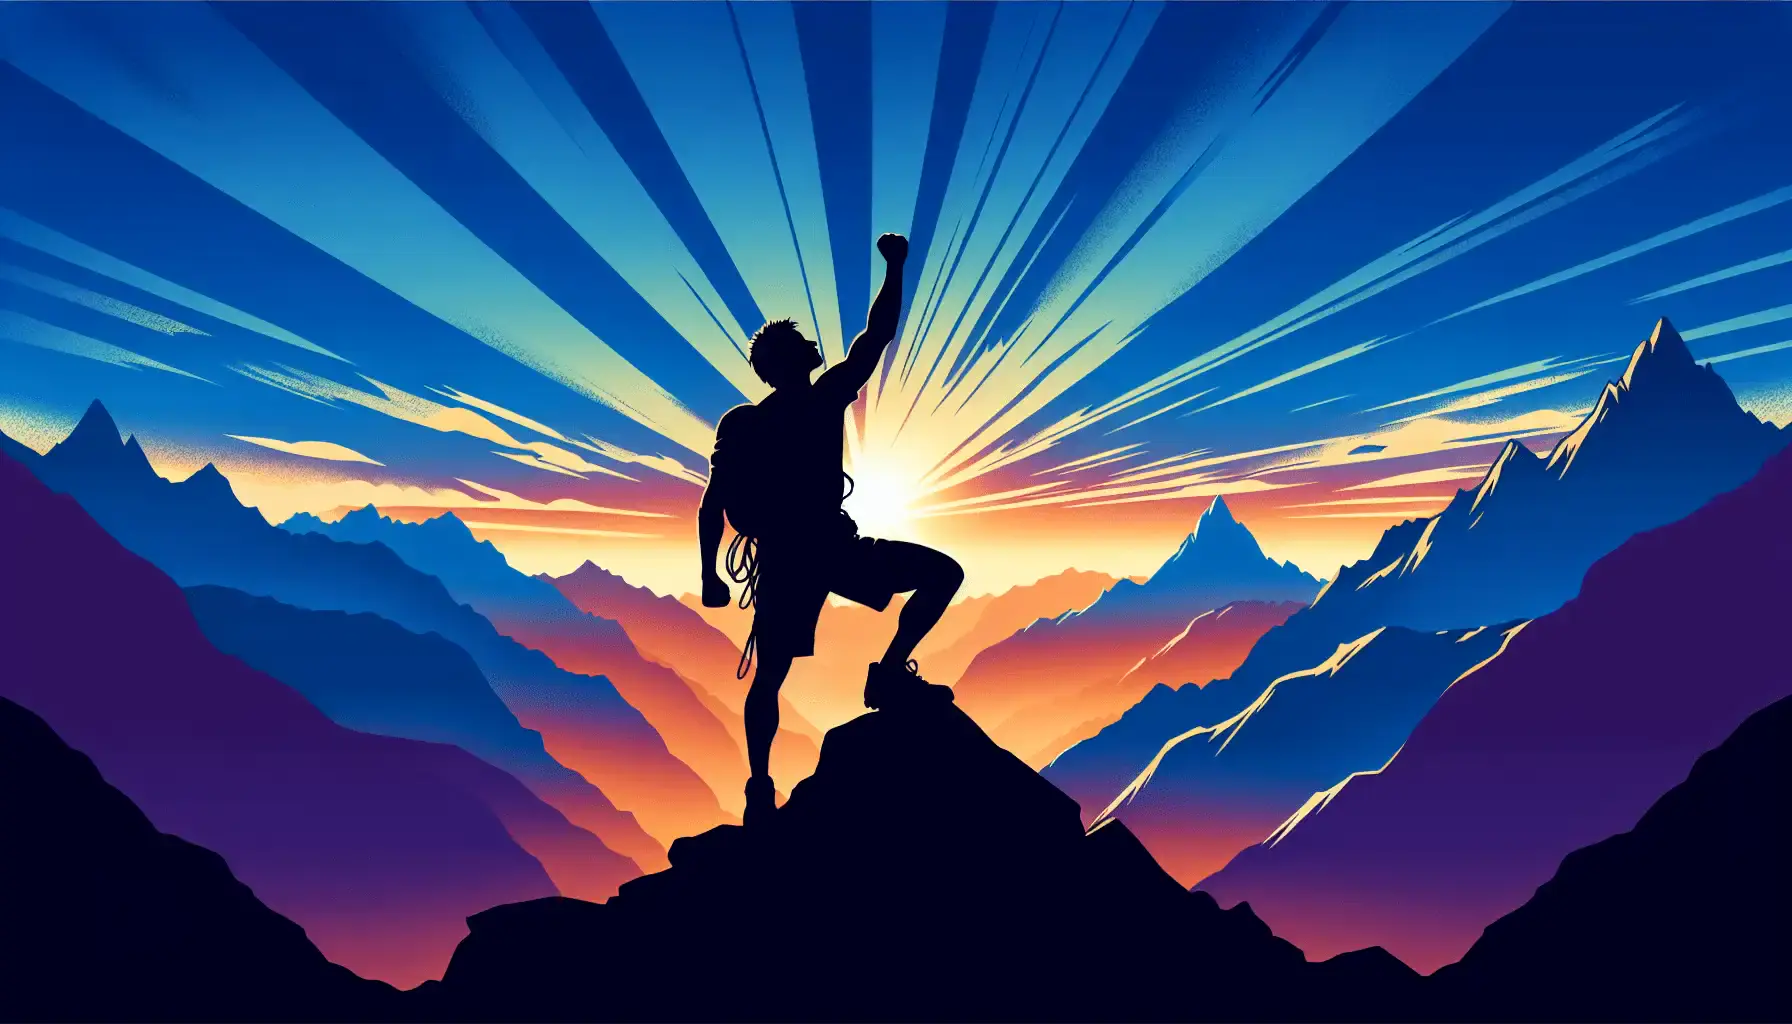 A lone climber, silhouetted against a breathtaking mountain sunrise, reaches the summit with a triumphant fist pump.